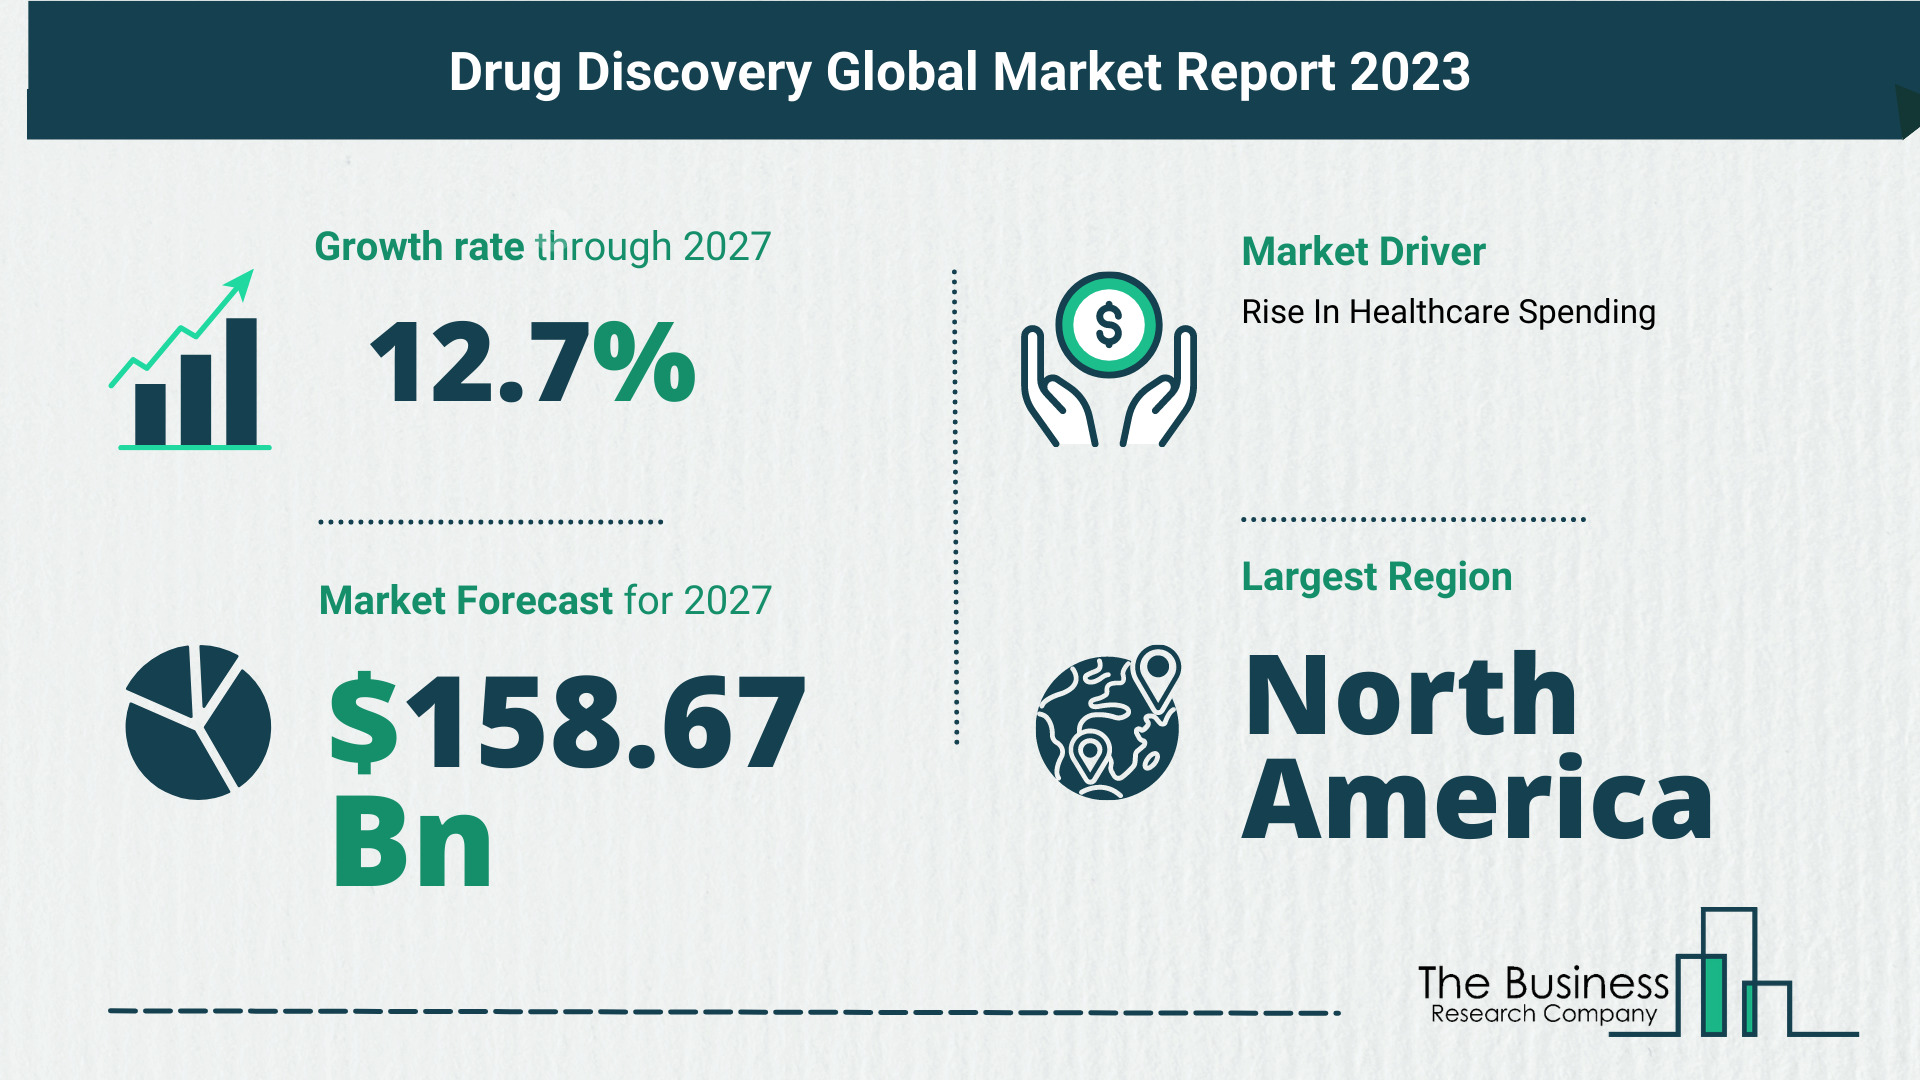 5 Essential Insights Regarding the Drug Discovery Market in 2023